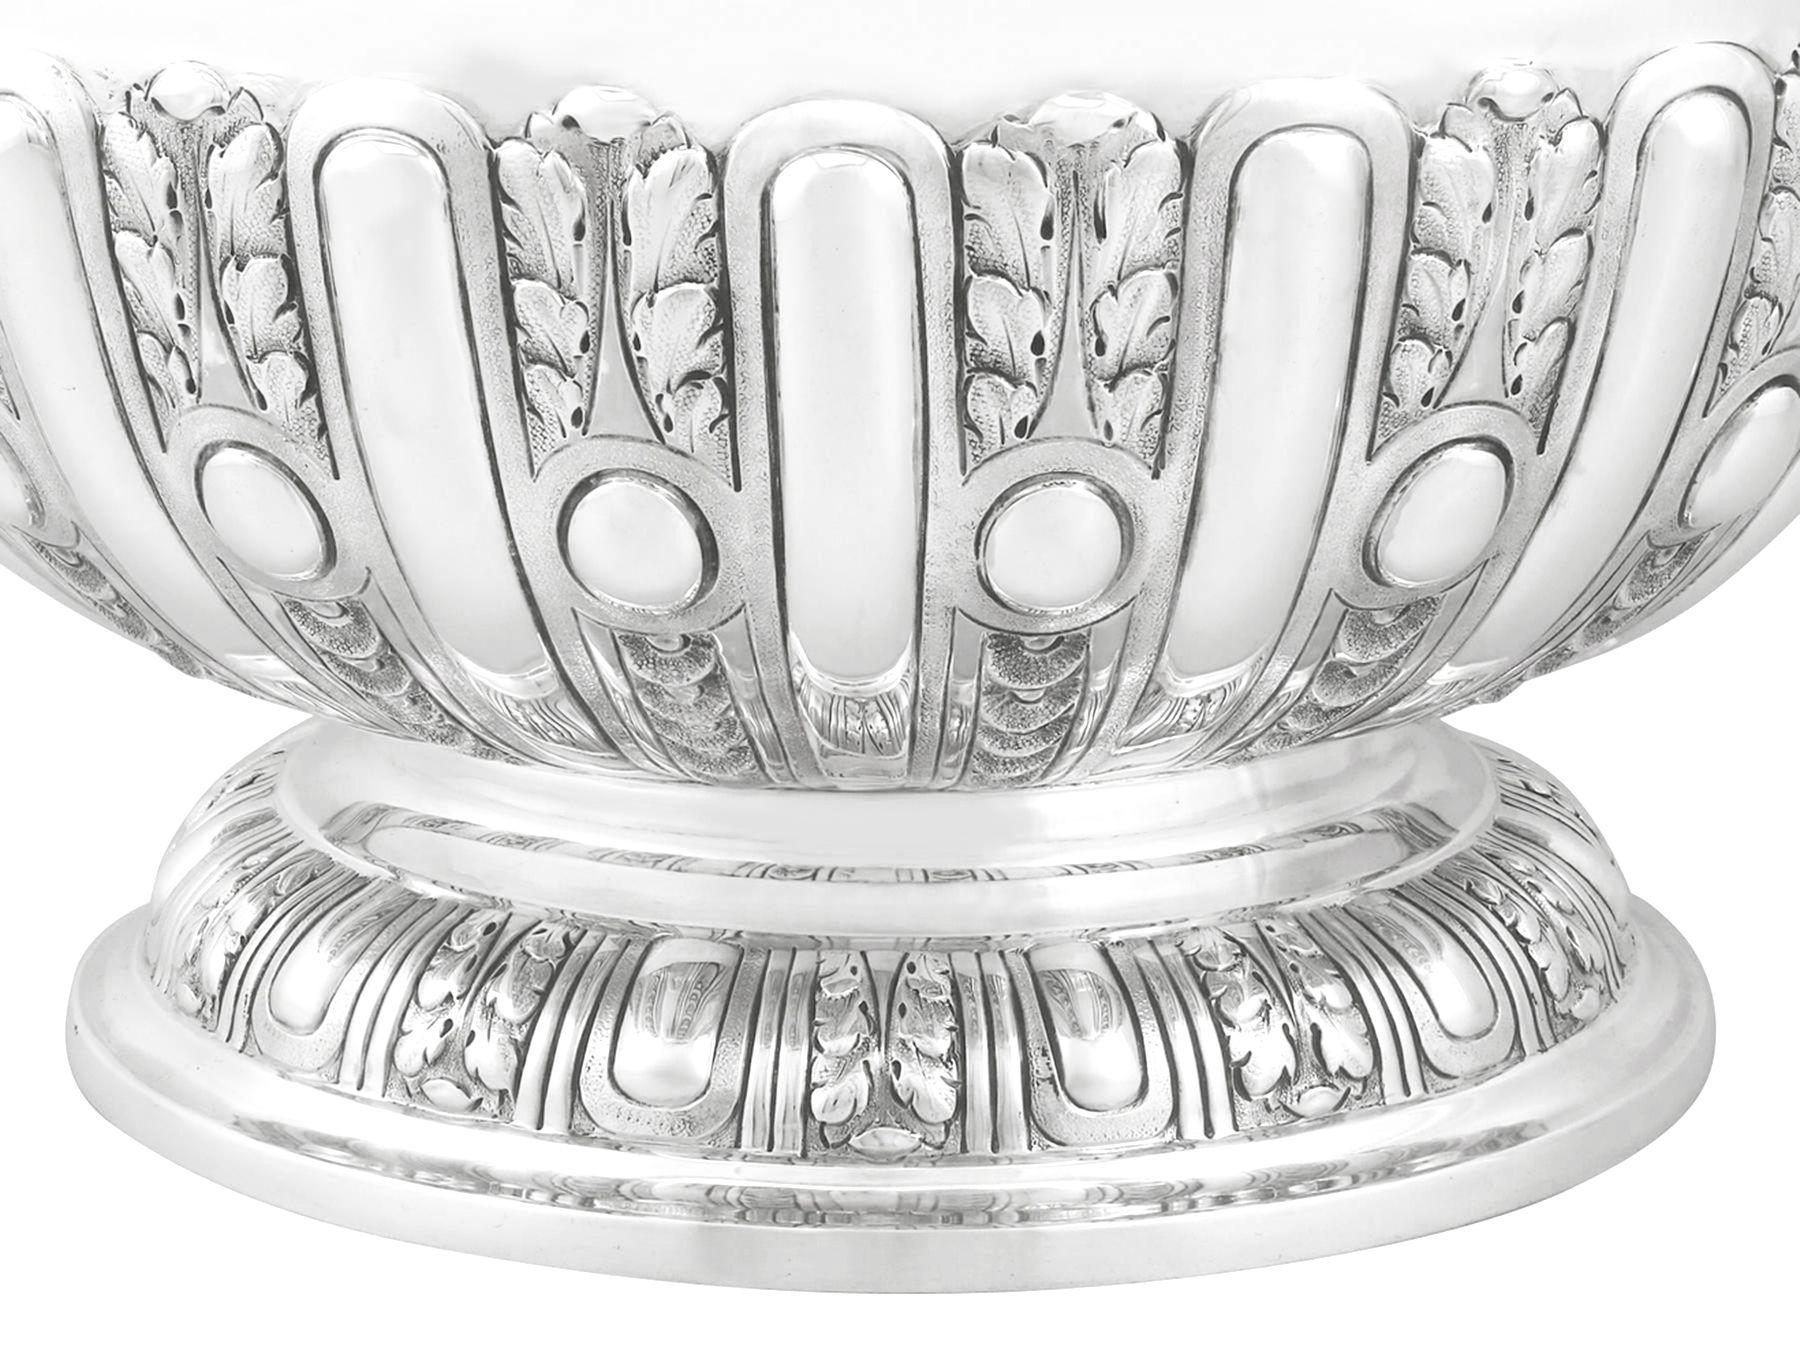 Late 19th Century Antique Victorian Sterling Silver Presentation Bowl by Mappin & Webb For Sale